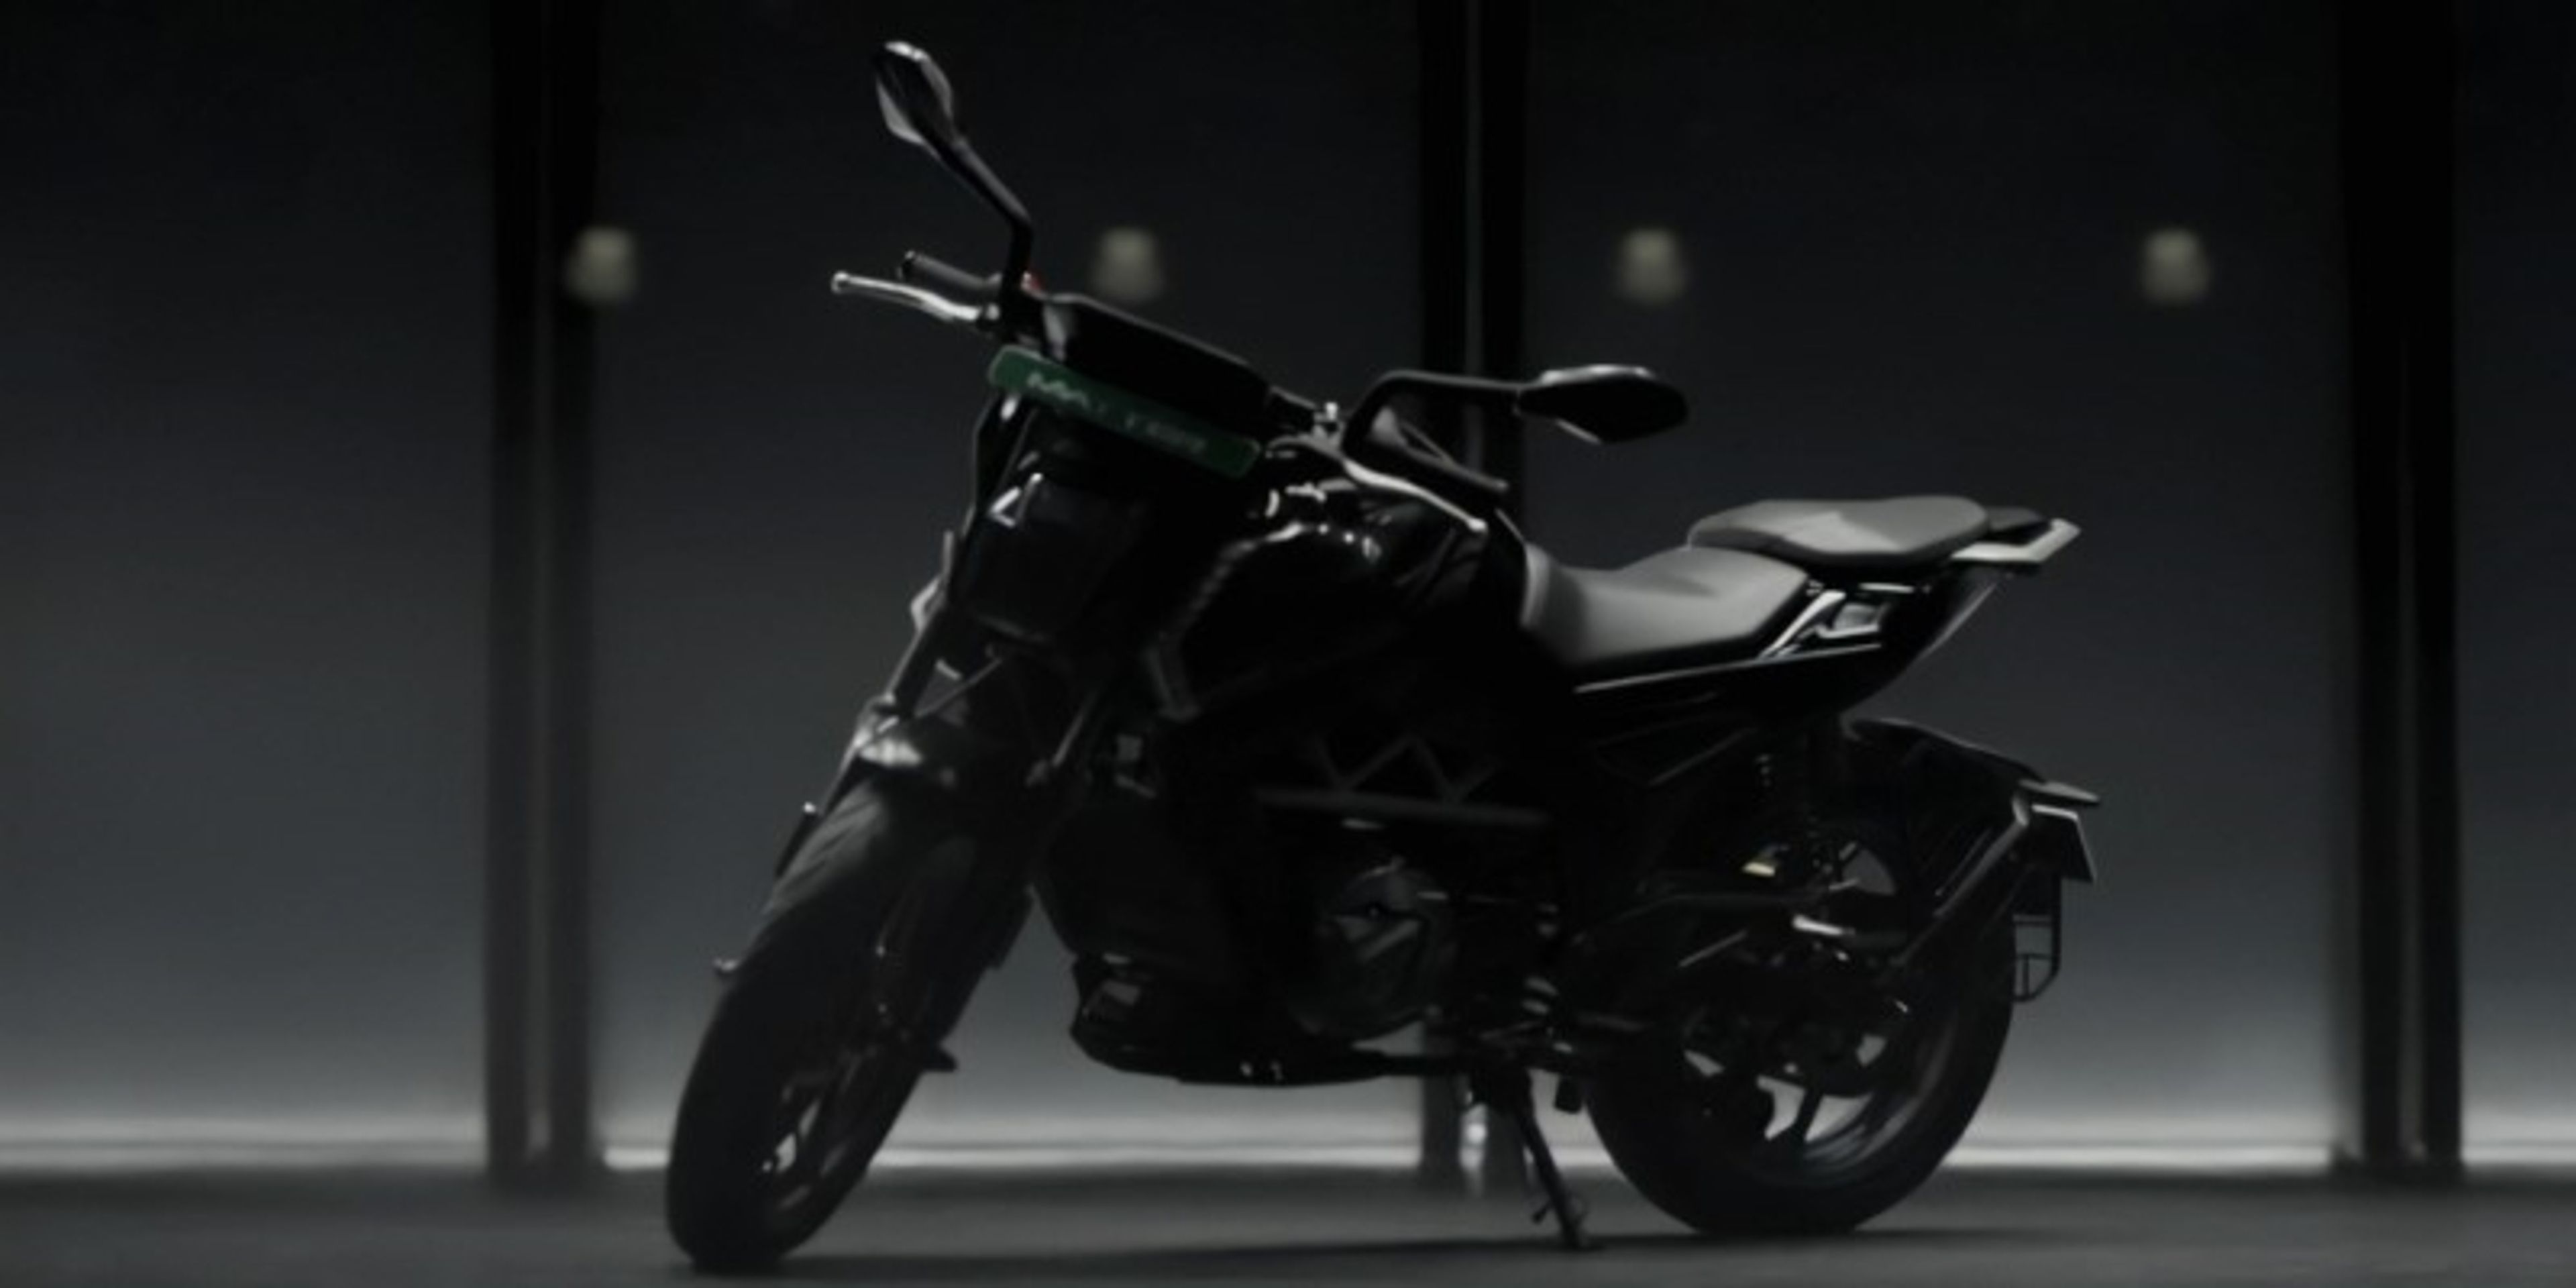 Matter unveils India’s first geared electric two-wheeler